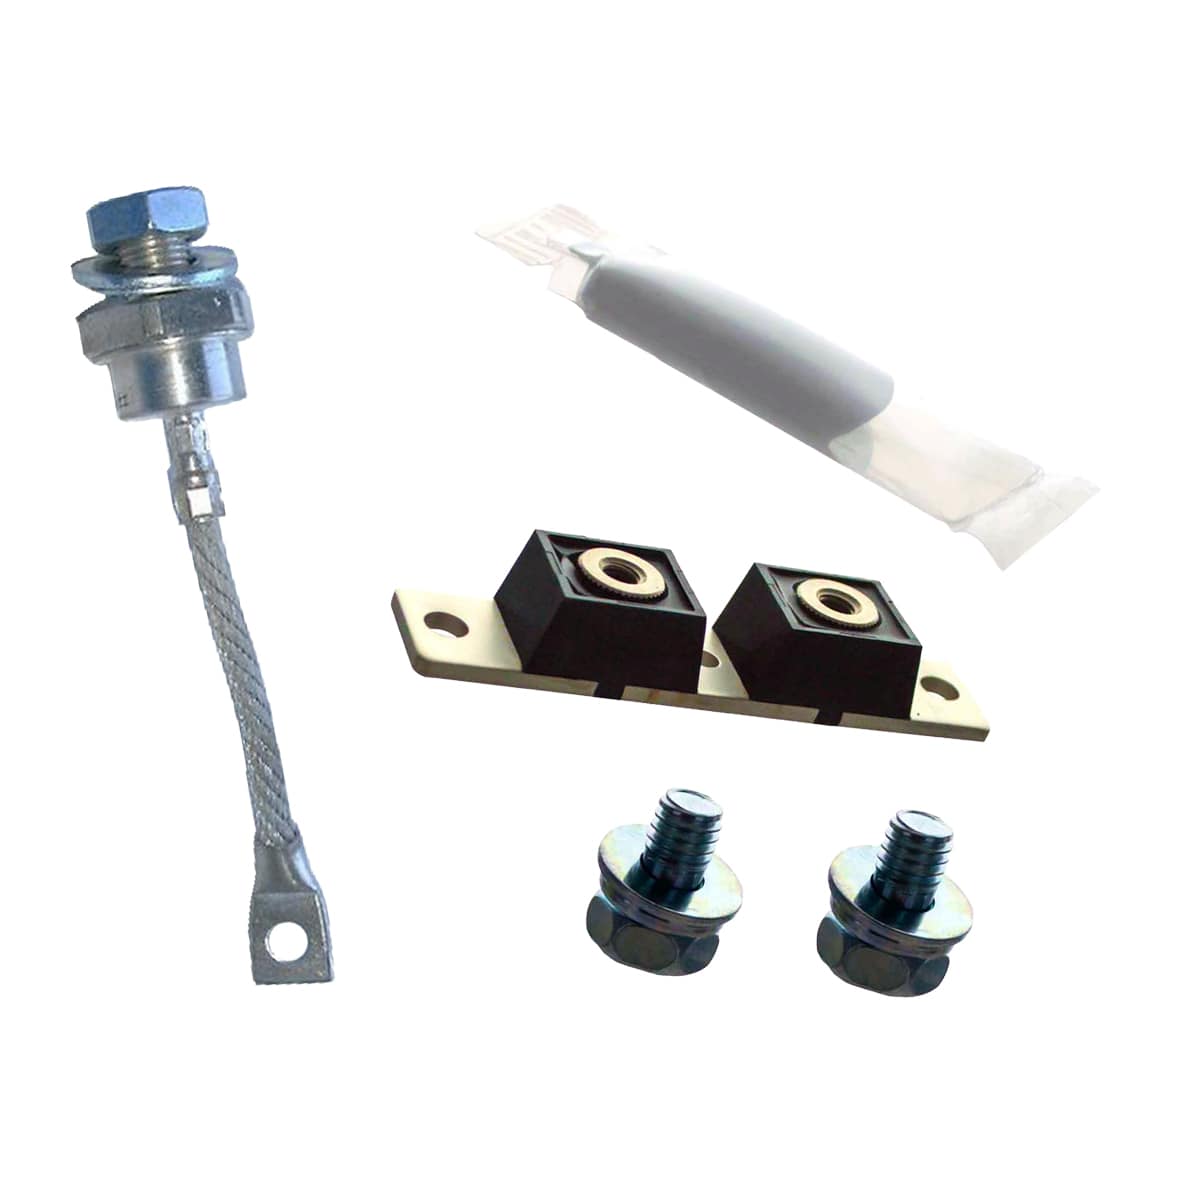 DIODE W/LEADS. Part: 260846